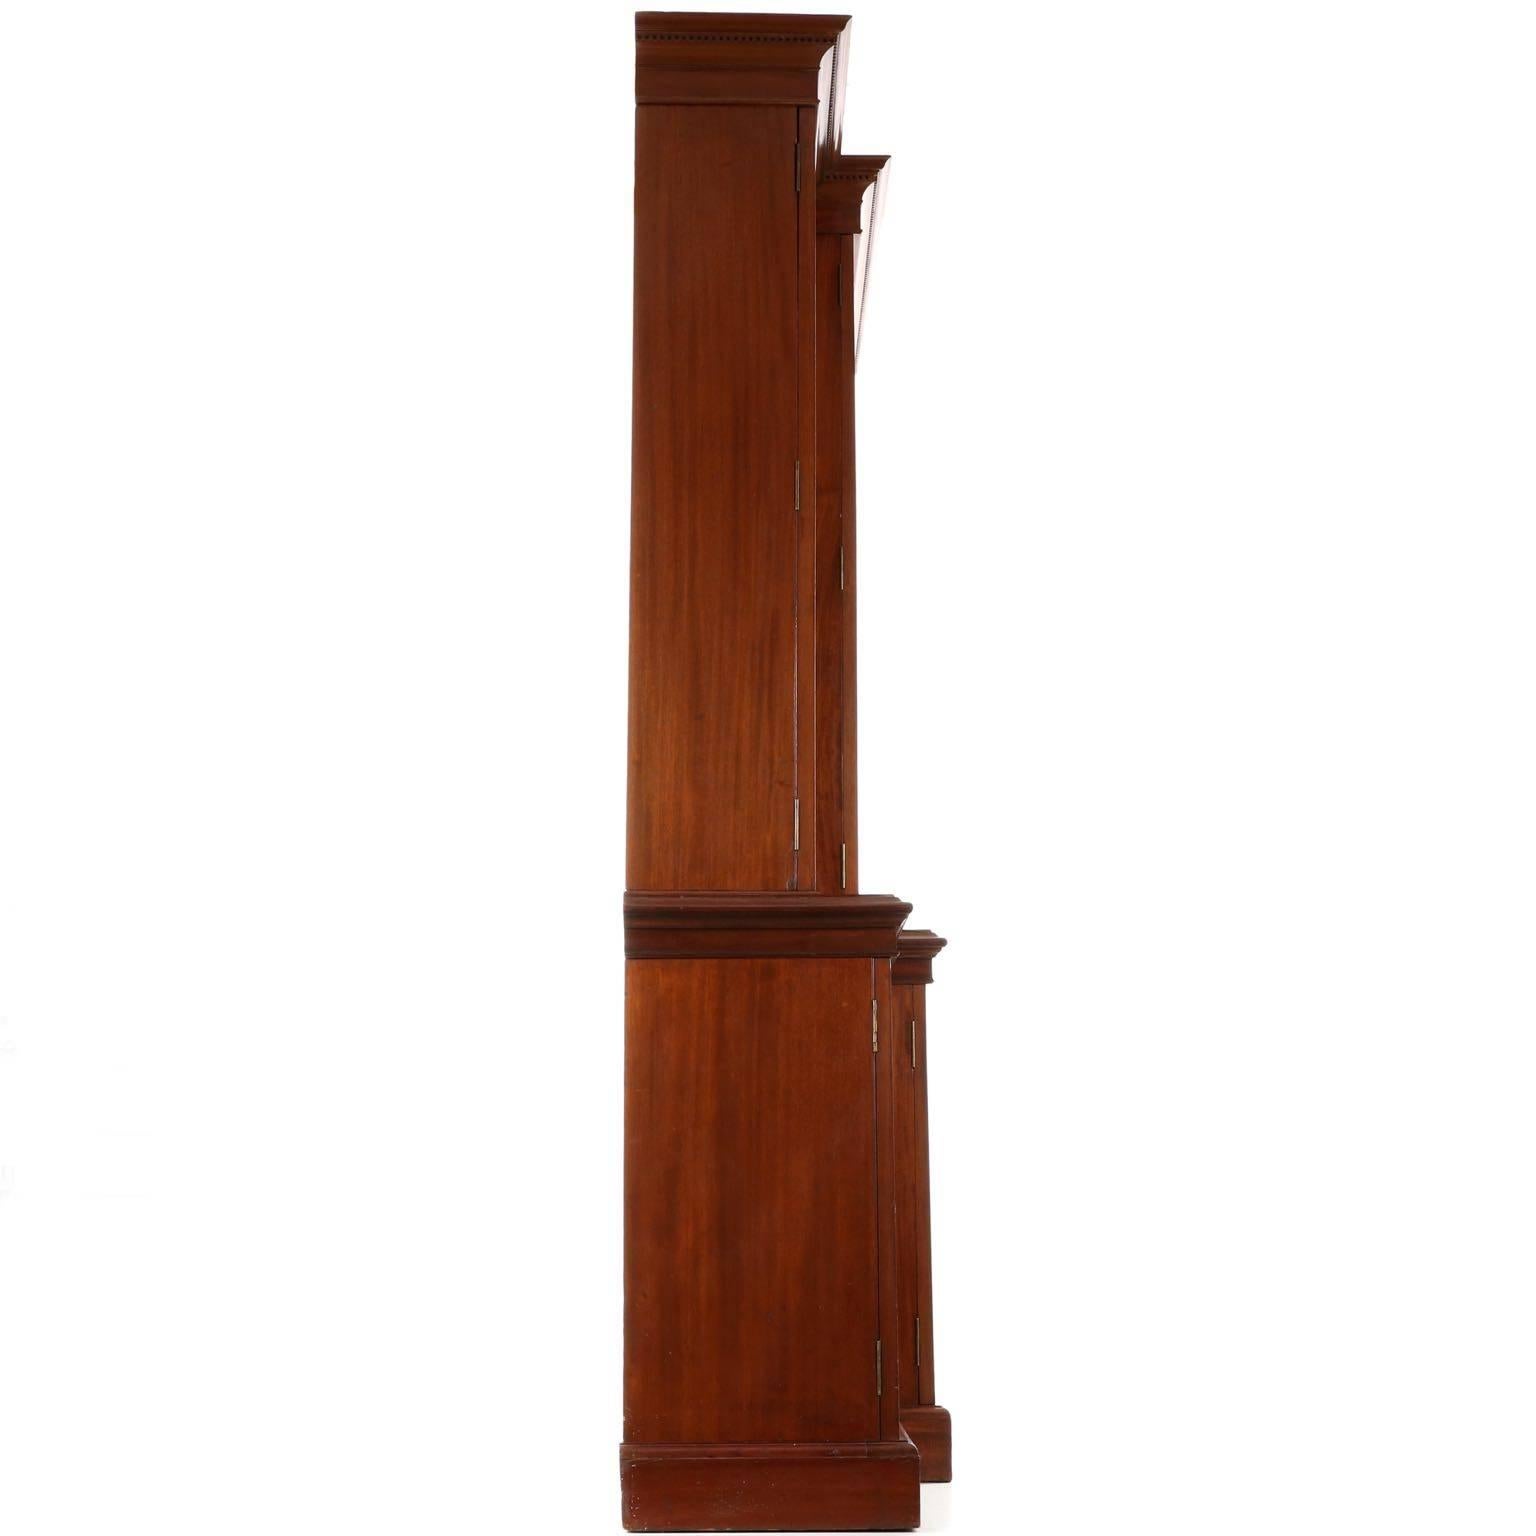 A most fine architectural piece for the formal library or sitting room, this large and impressive American Federal period library bookcase is ingeniously crafted to break down into five easily handled components: the crest, the three bookcase